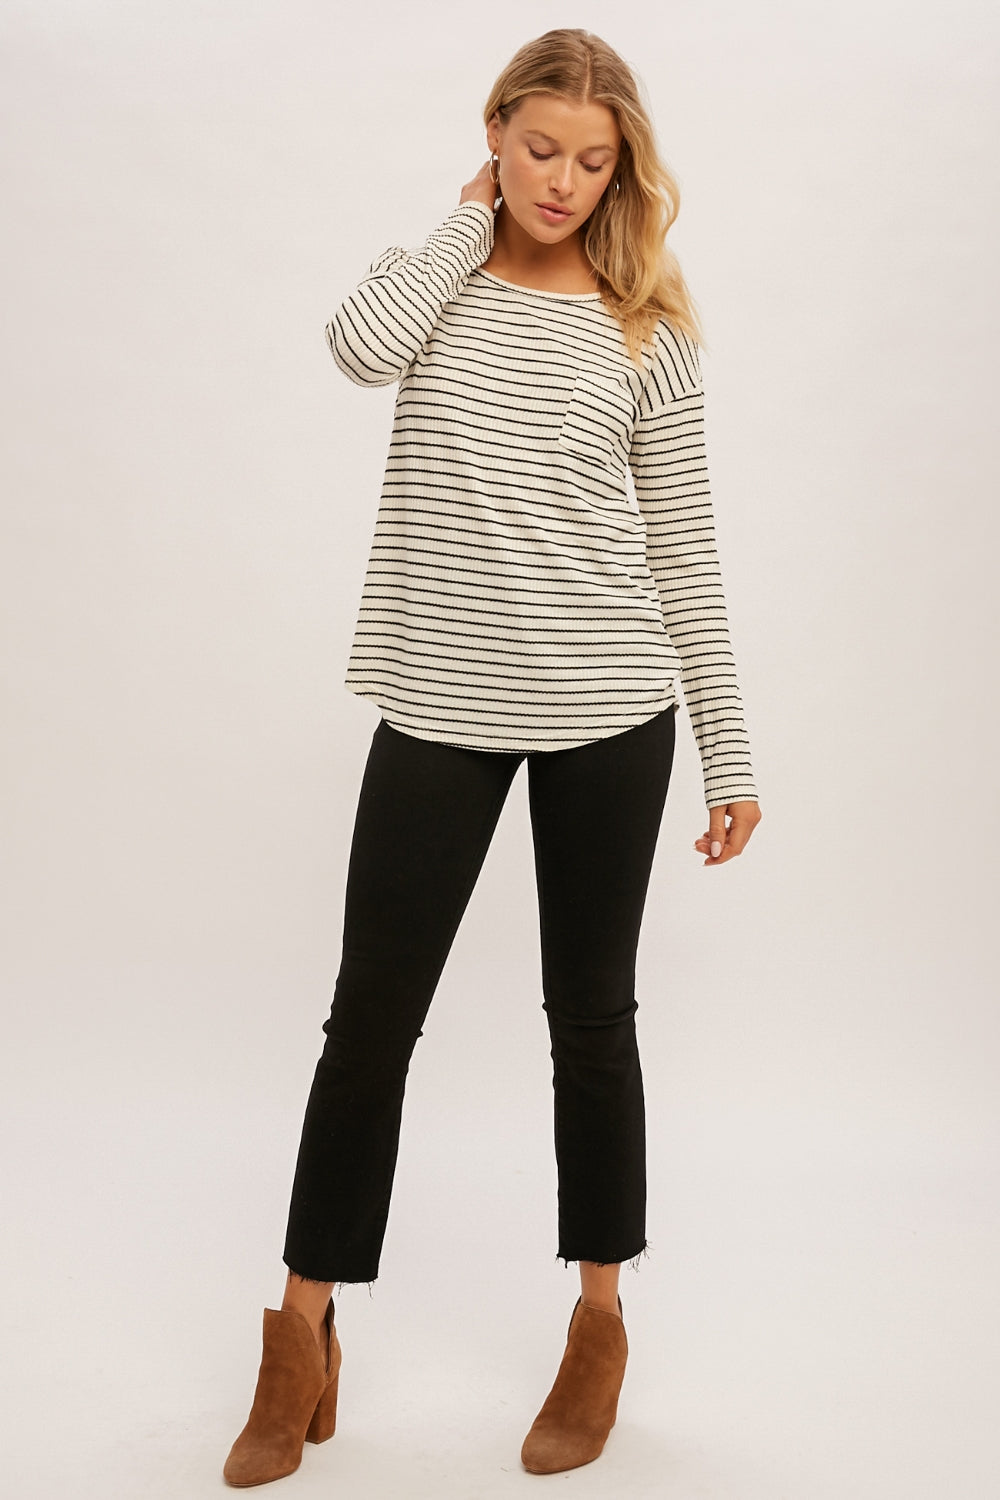 Striped Contrast Swiss Dot Lace Back Top